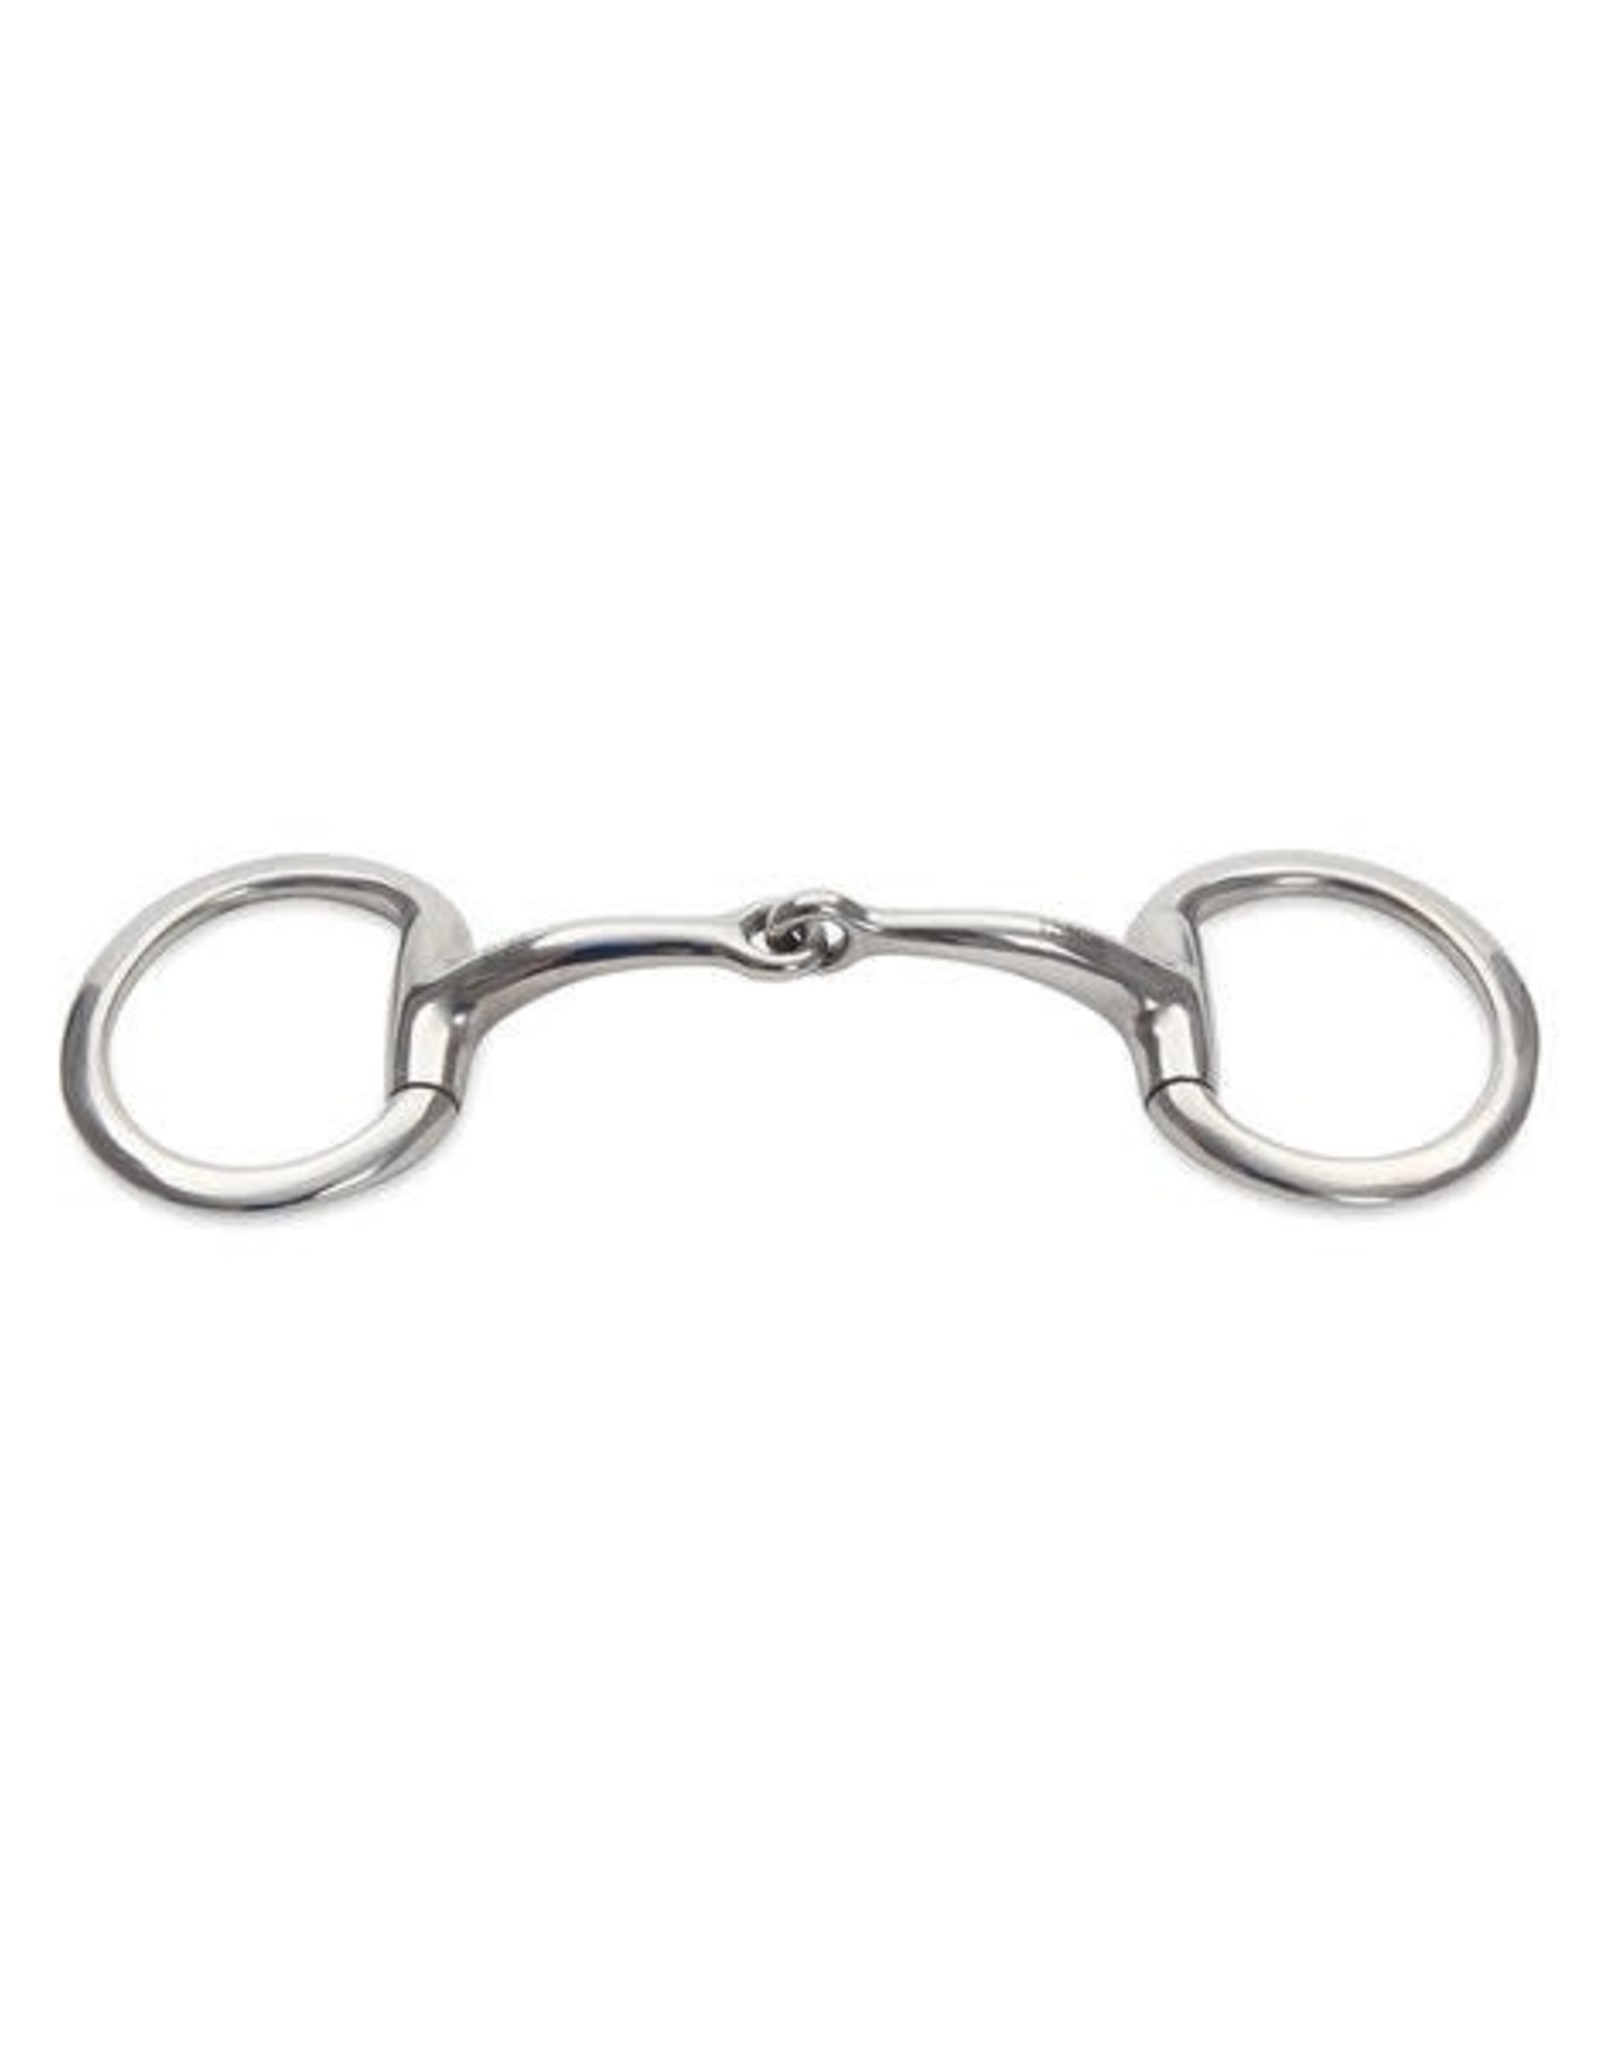 SHIRES Standard Curved Mouth Eggbutt Snaffle